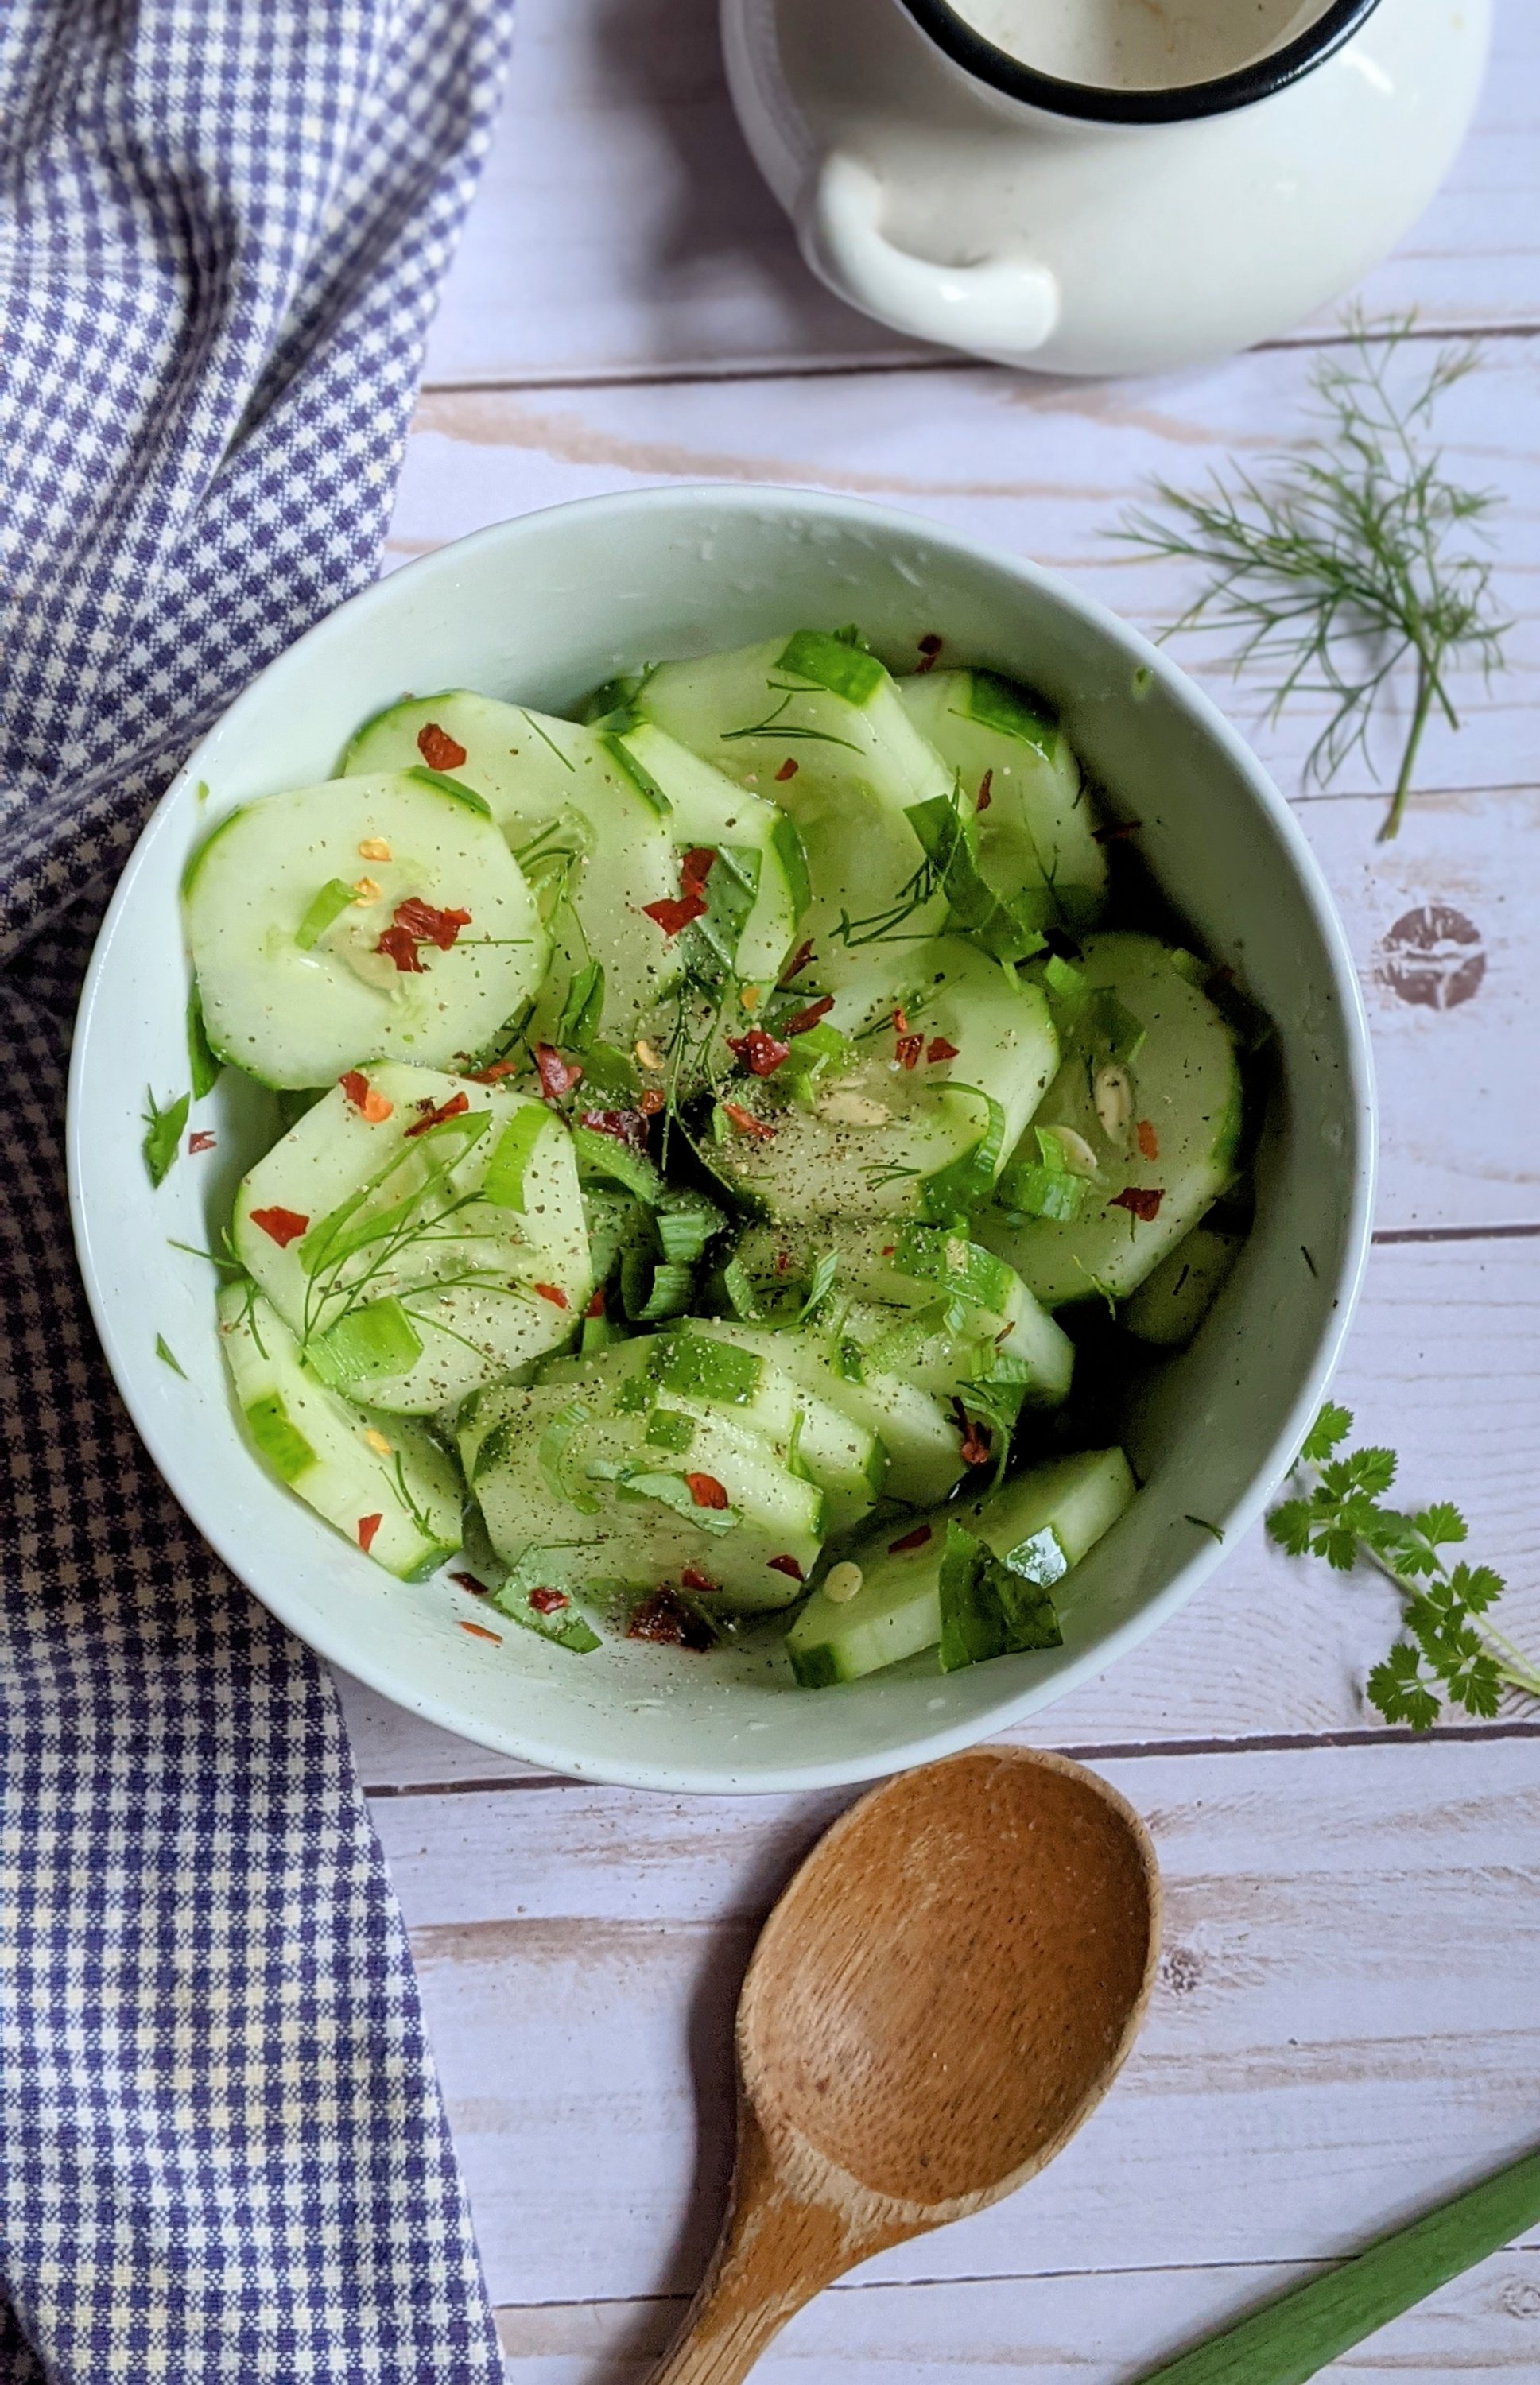 vegan gluten free cucumber salad with dill and vinegar and sugar recipe plant based summer side dishes for bbq refreshing summer salads vegetarian and meatless salad ideas with cucumbers